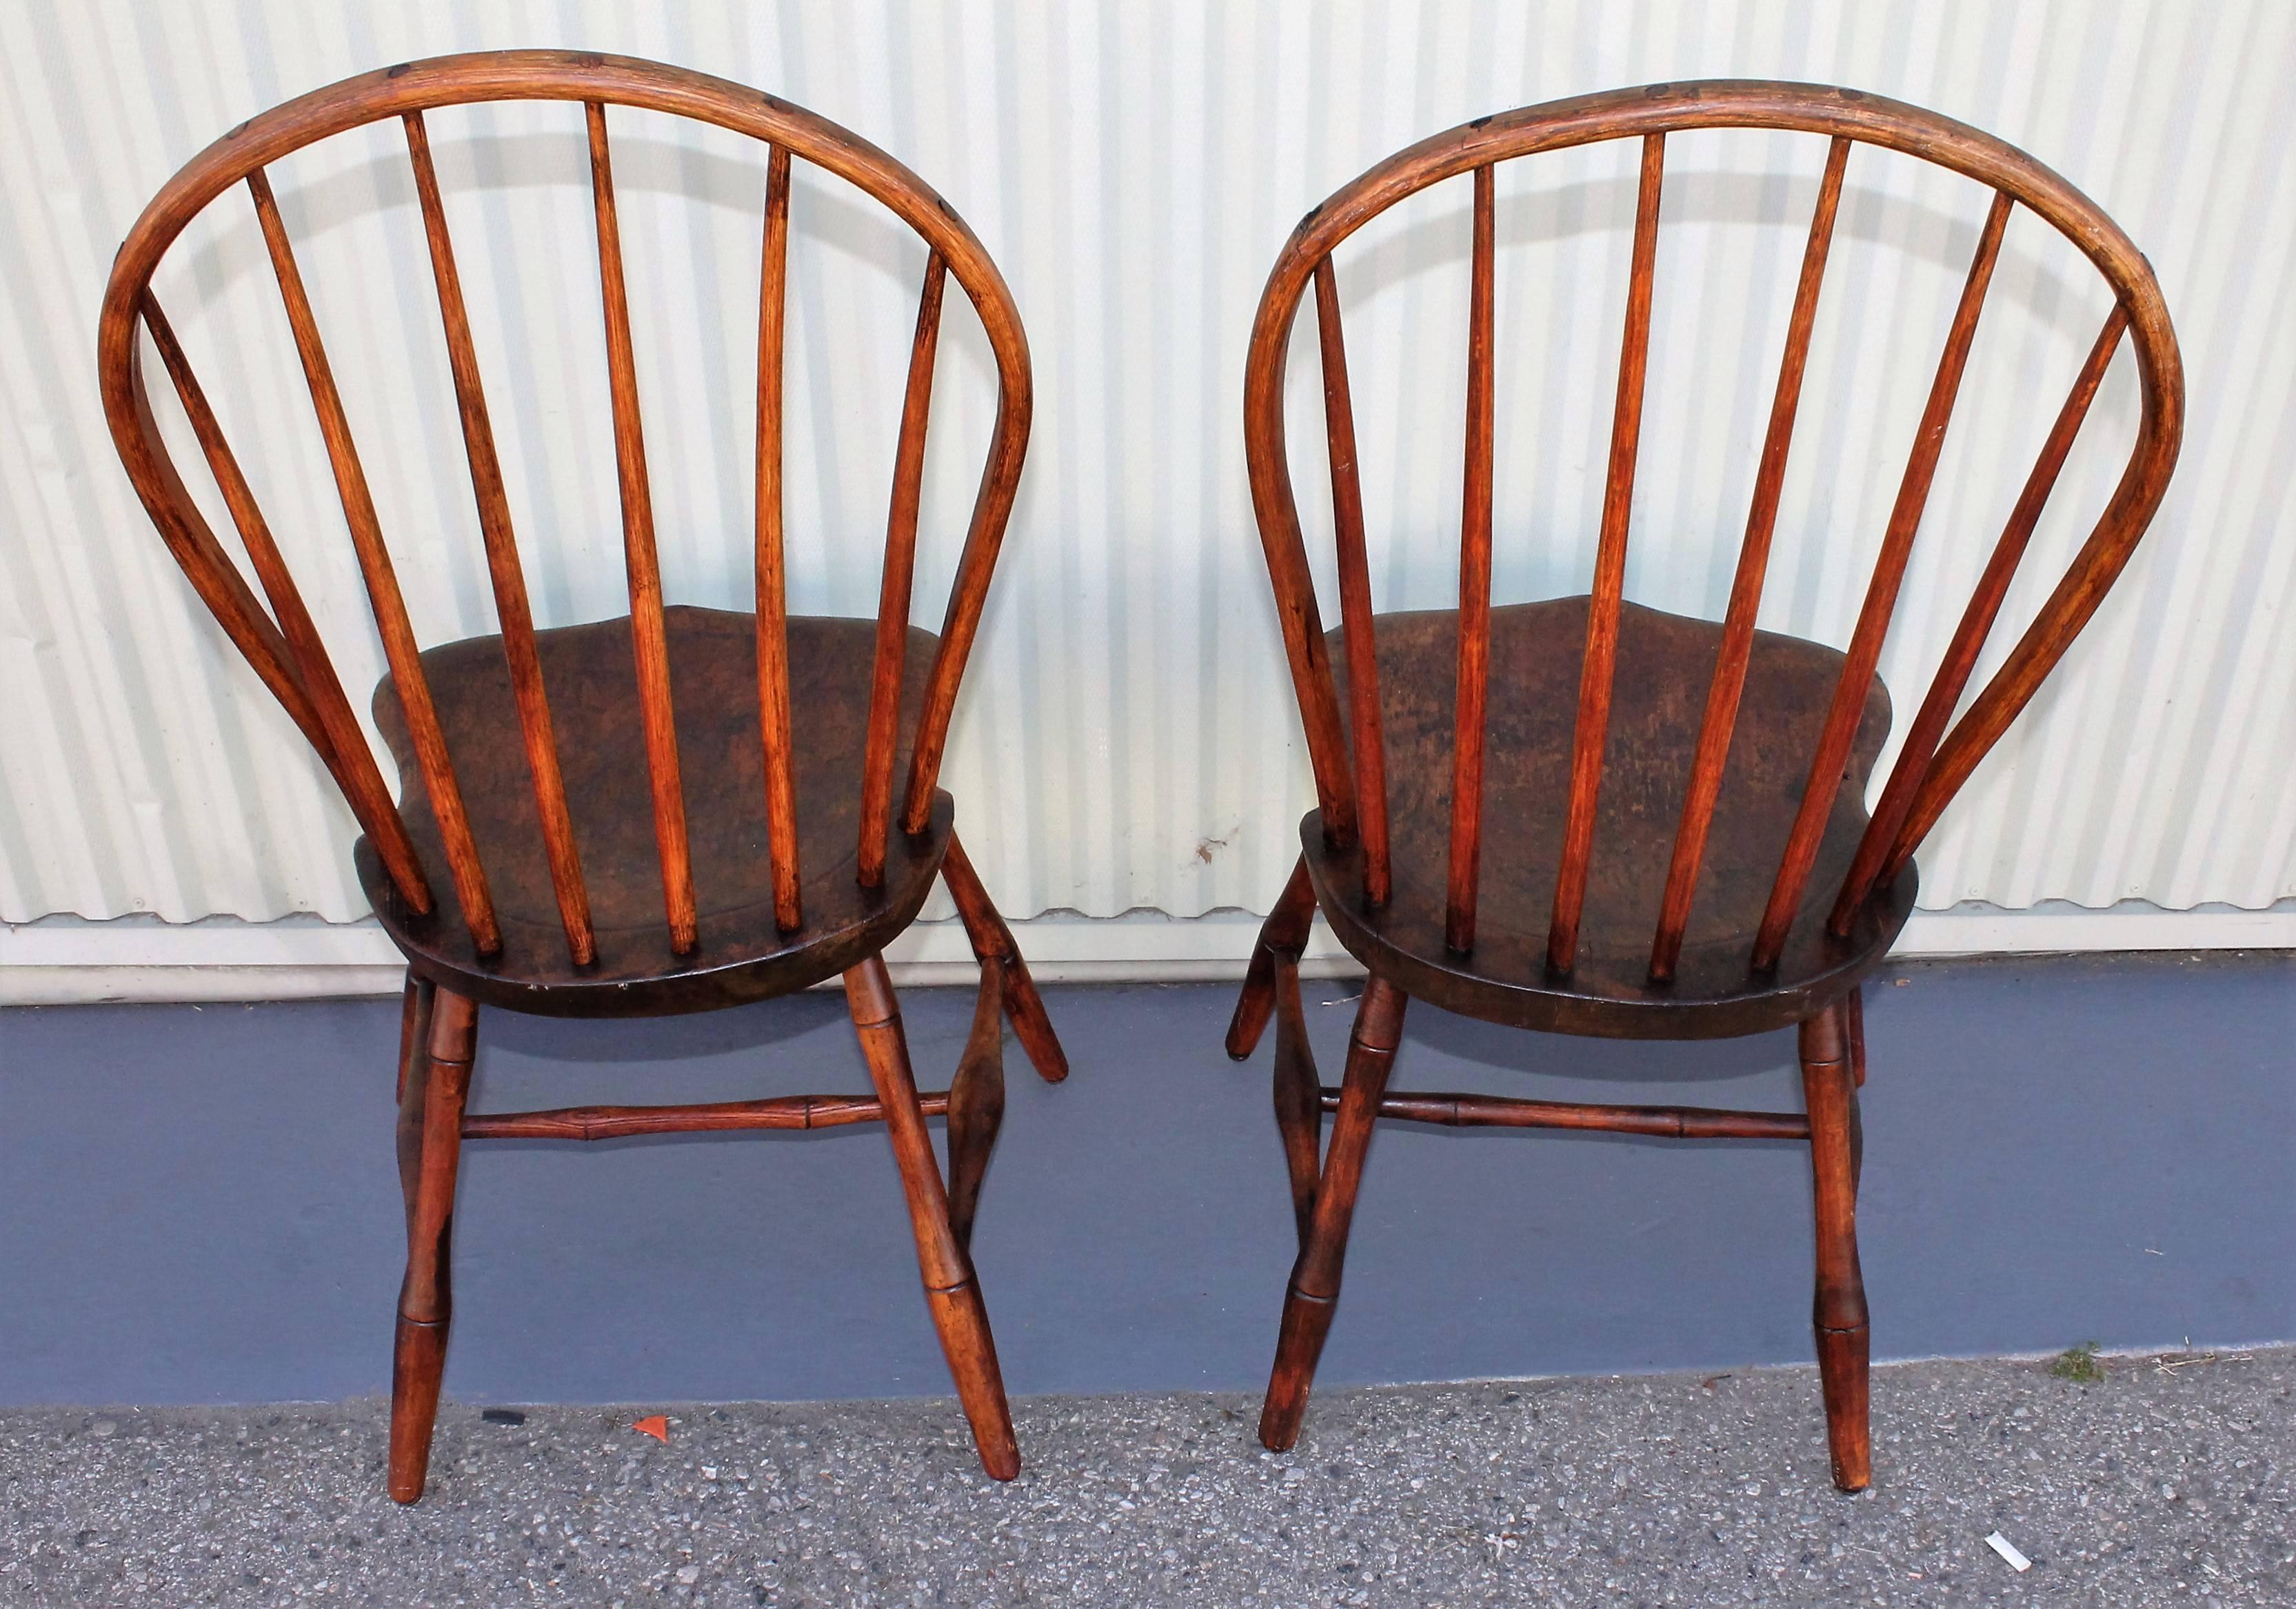 Wood Pair of 18th Century Old Surface Windsor Chairs from New England